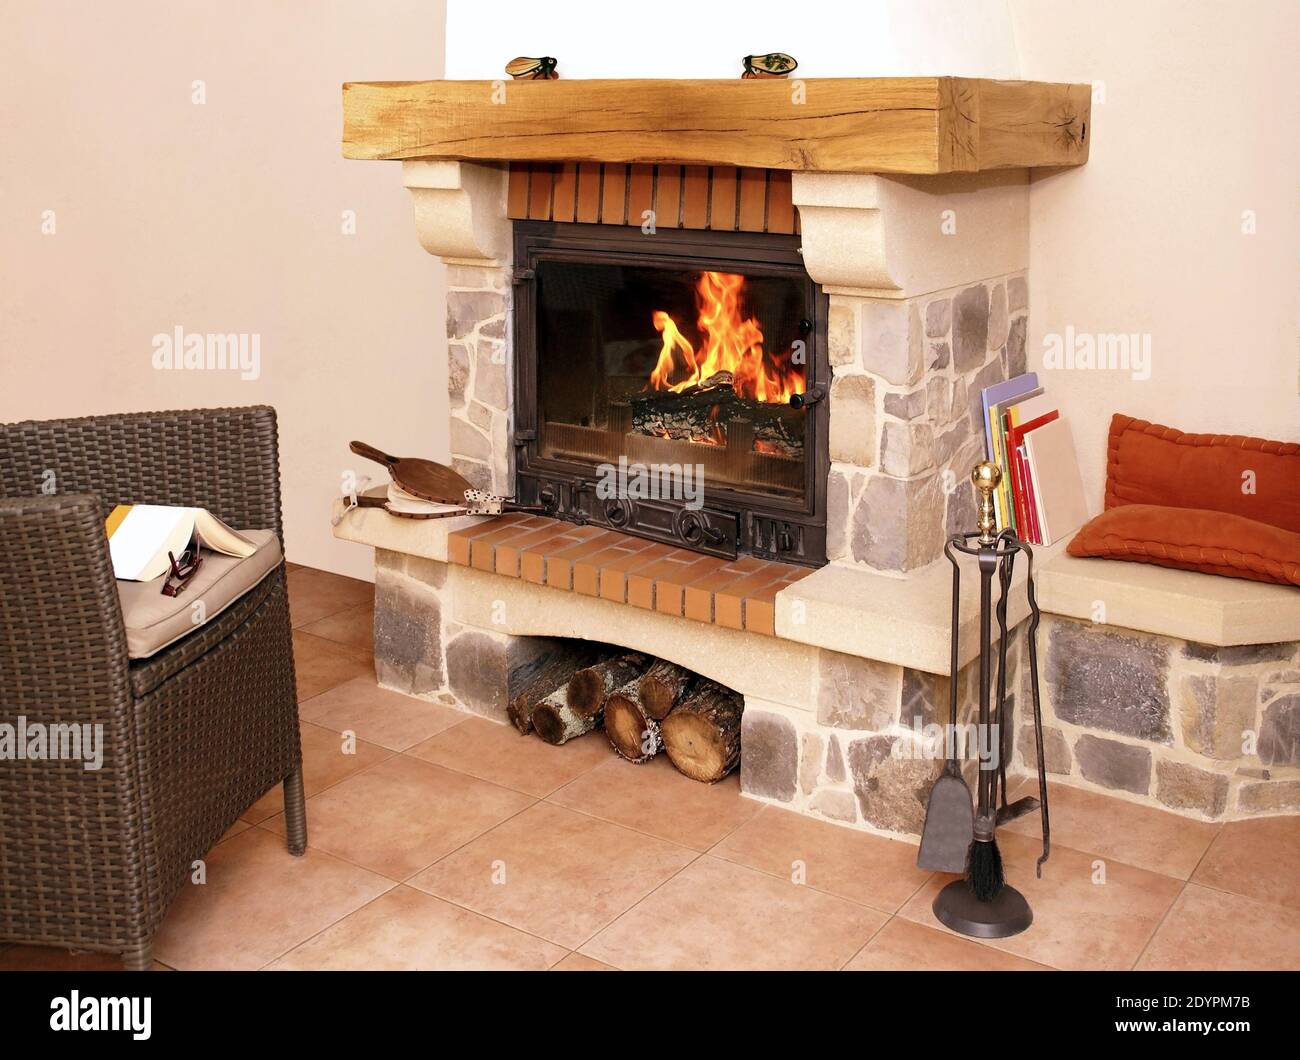 Quietude and warmth of fire in a stone and wood fireplace. Stock Photo